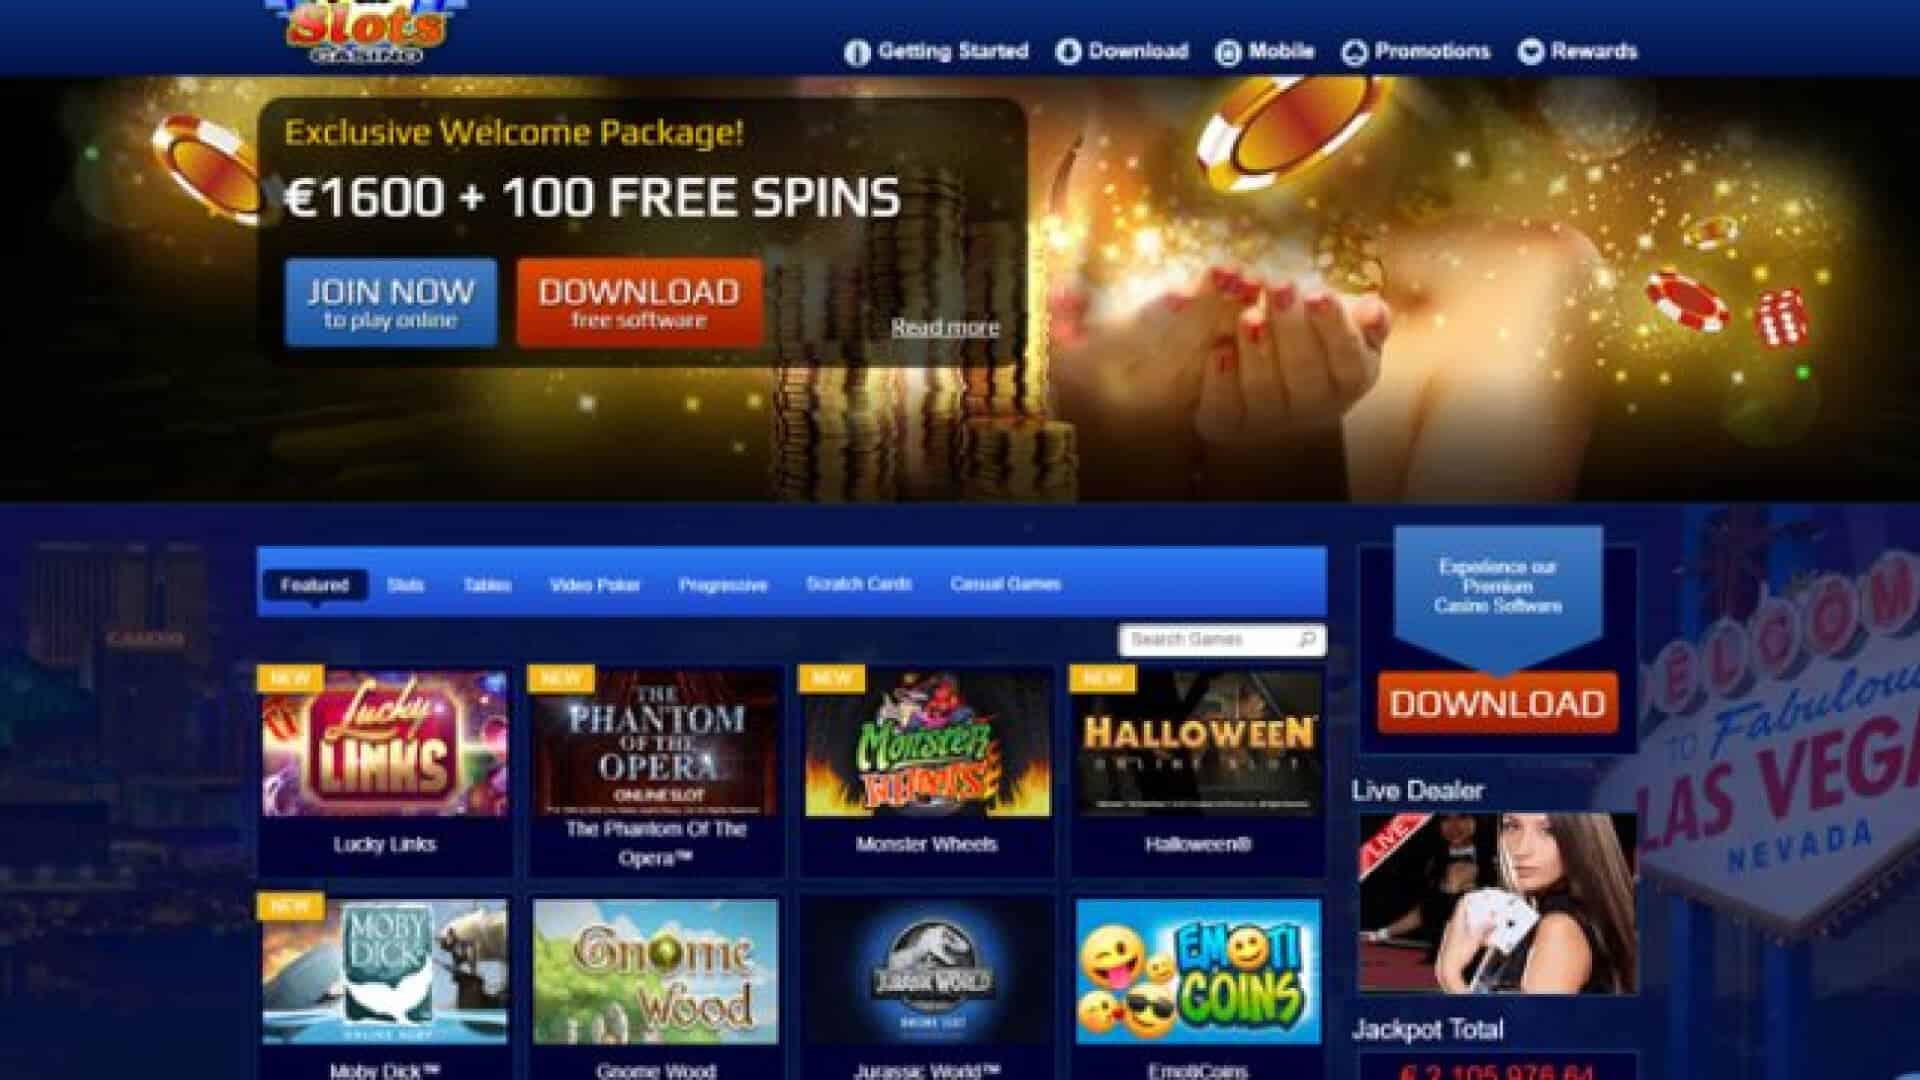 Allslots Casino website is a detailed guide to playing online casino games